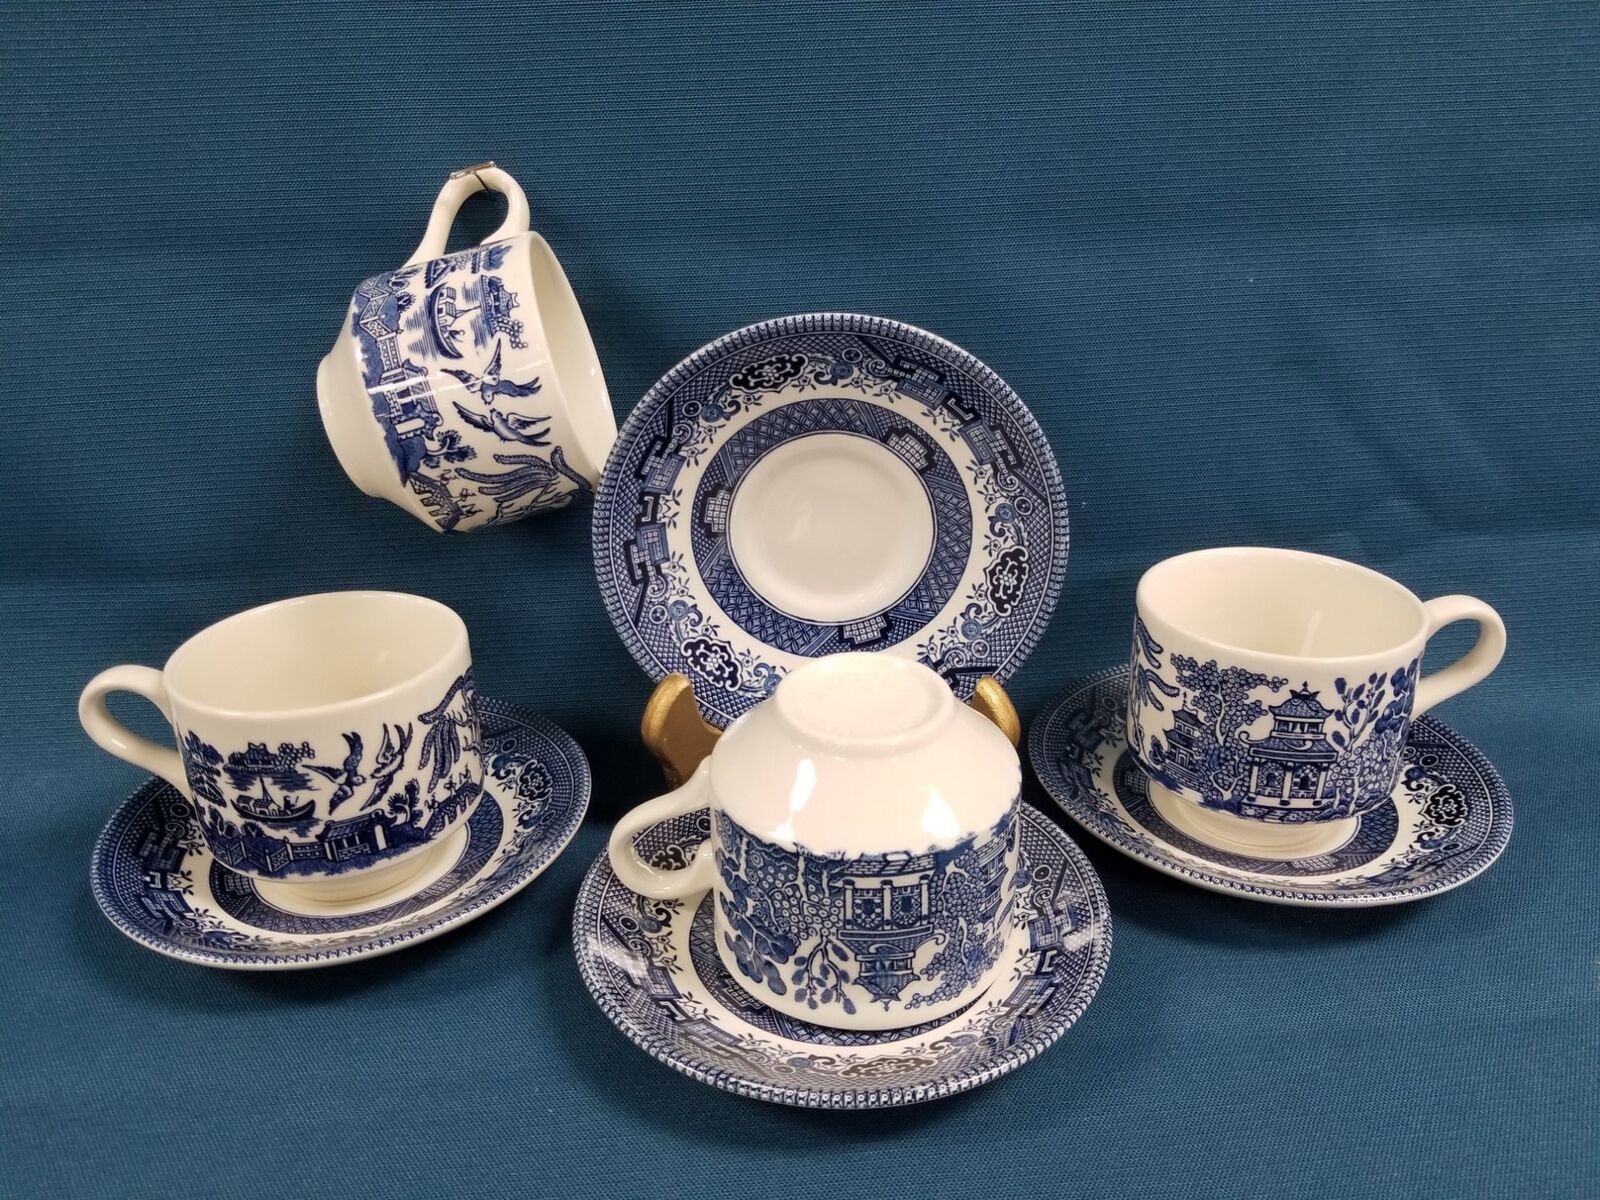 Set of 4 Vintage Churchill England Blue Willow Pattern Teacups & Saucers